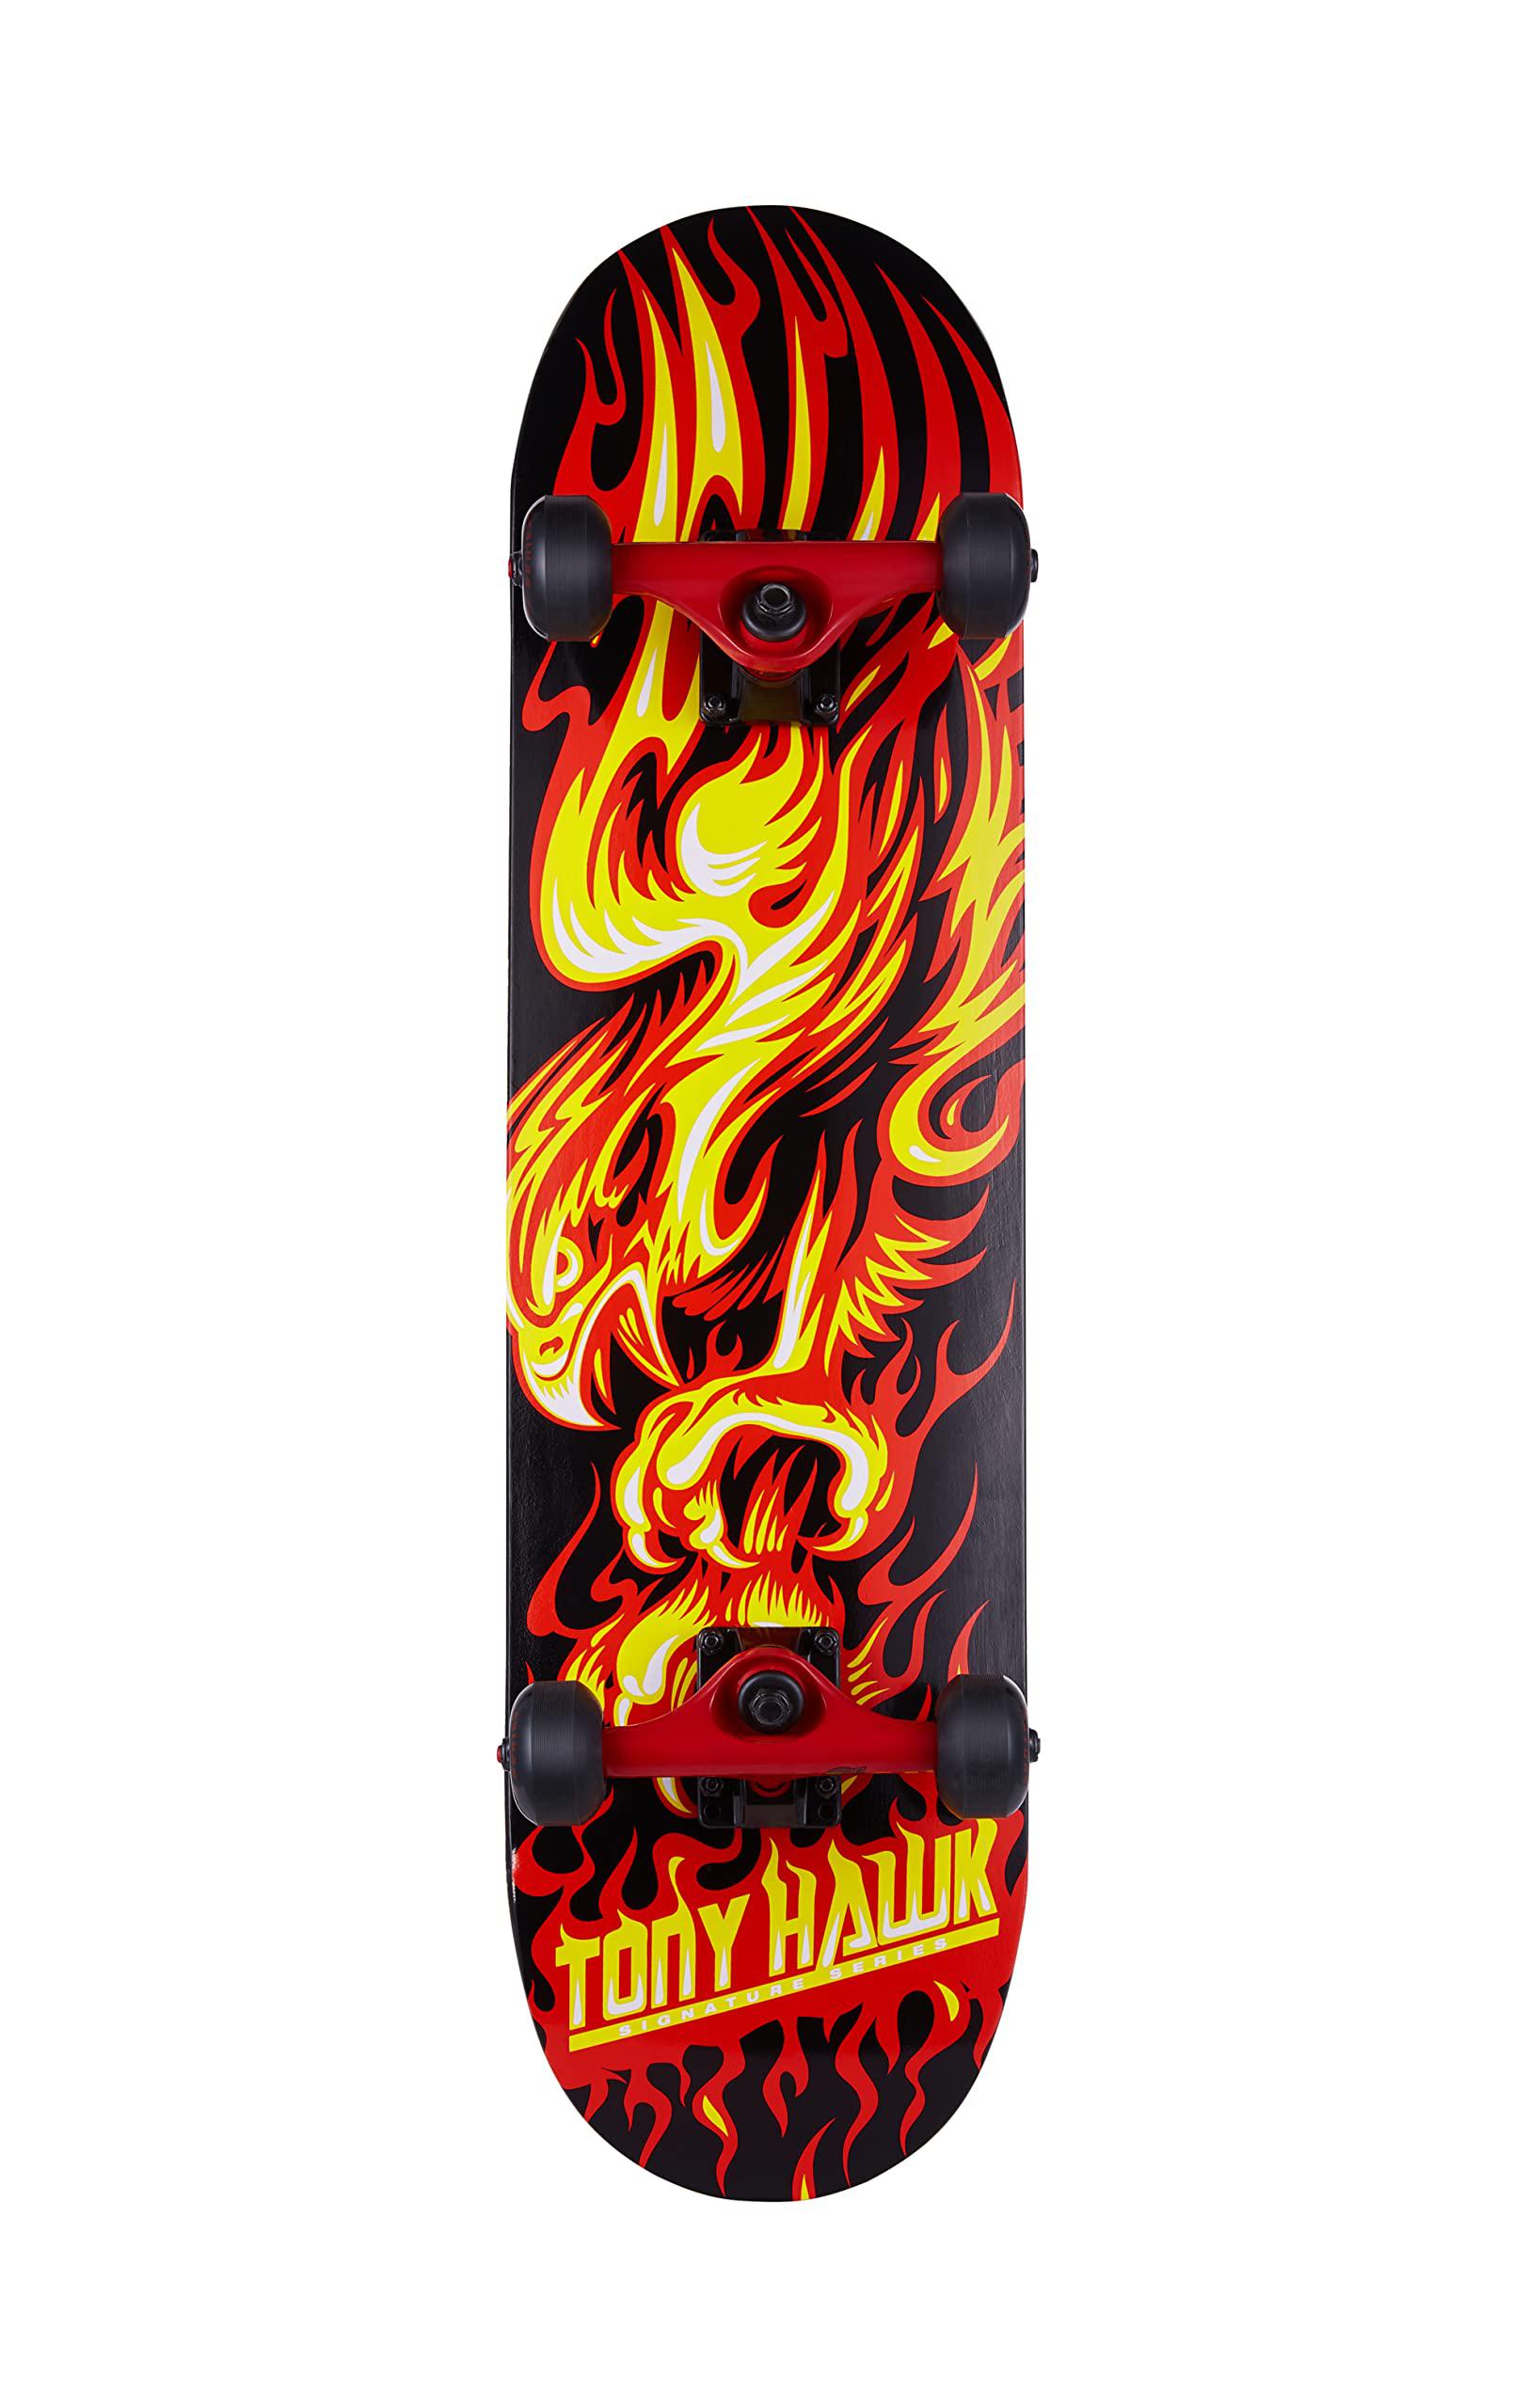 Voyager tony hawk 31 inch skateboard, tony hawk signature series 4, 9-ply maple deck skateboard for cruising, carving, tricks and dow